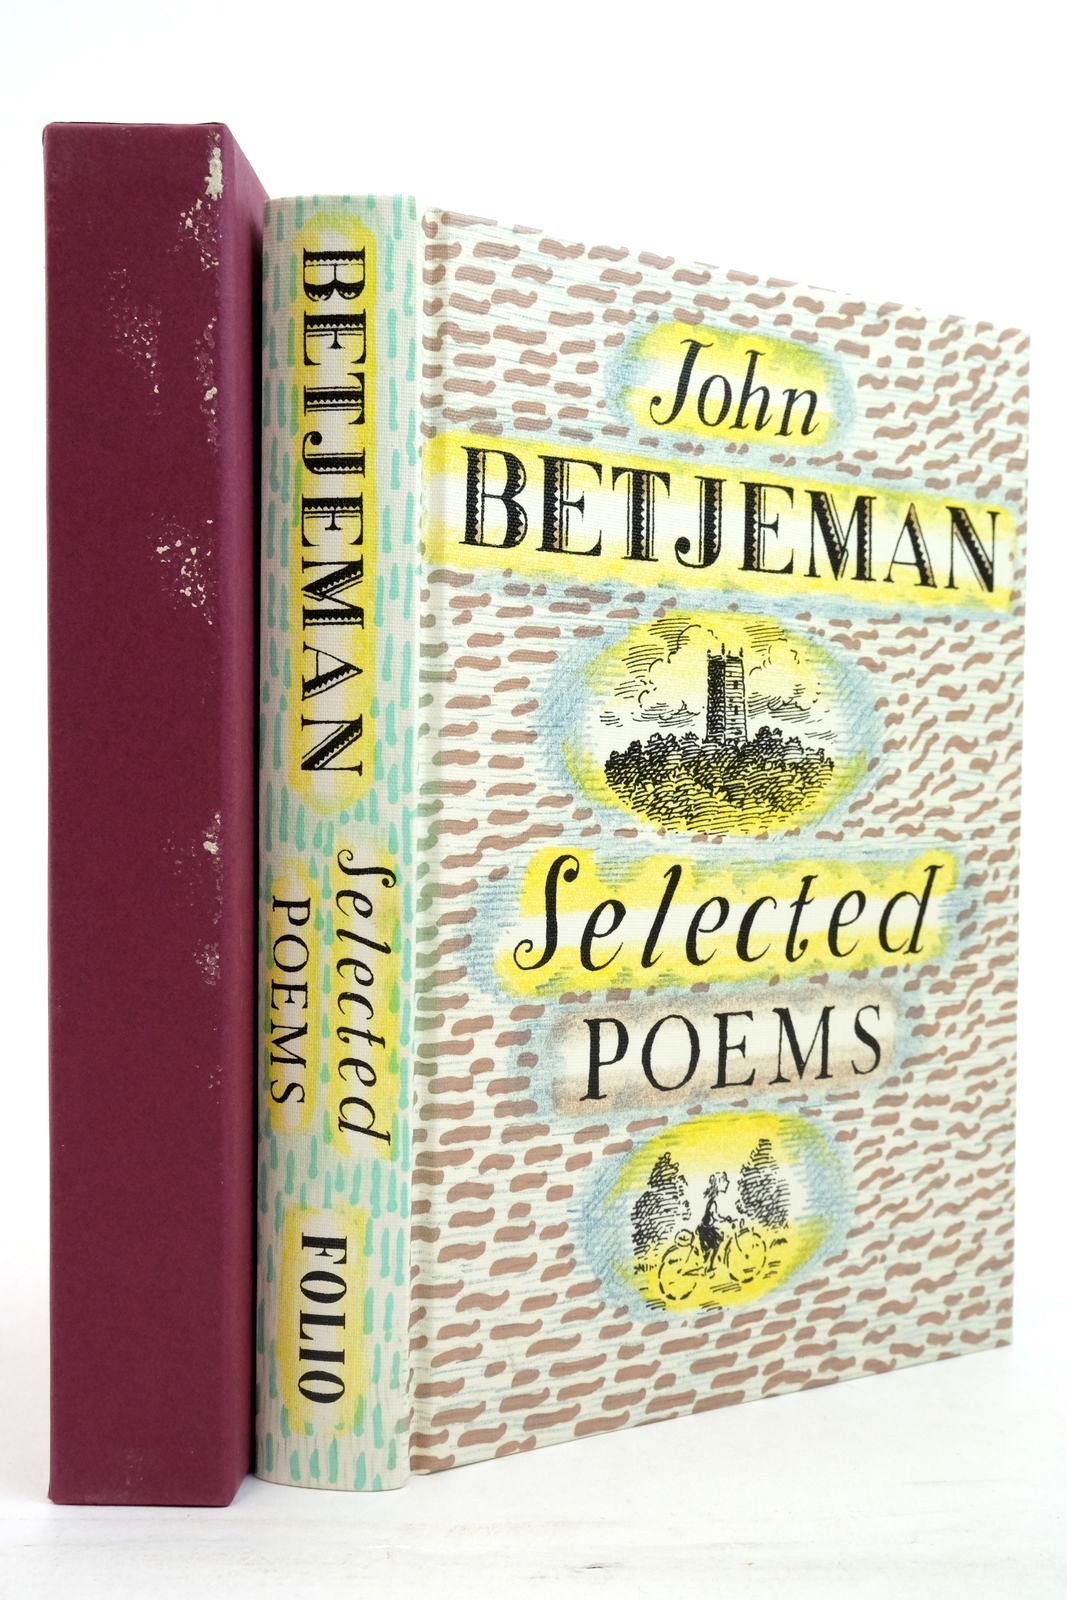 Photo of JOHN BETJEMAN SELECTED POEMS written by Betjeman, John
Powers, Alan illustrated by Bailey, Peter published by Folio Society (STOCK CODE: 2138116)  for sale by Stella & Rose's Books